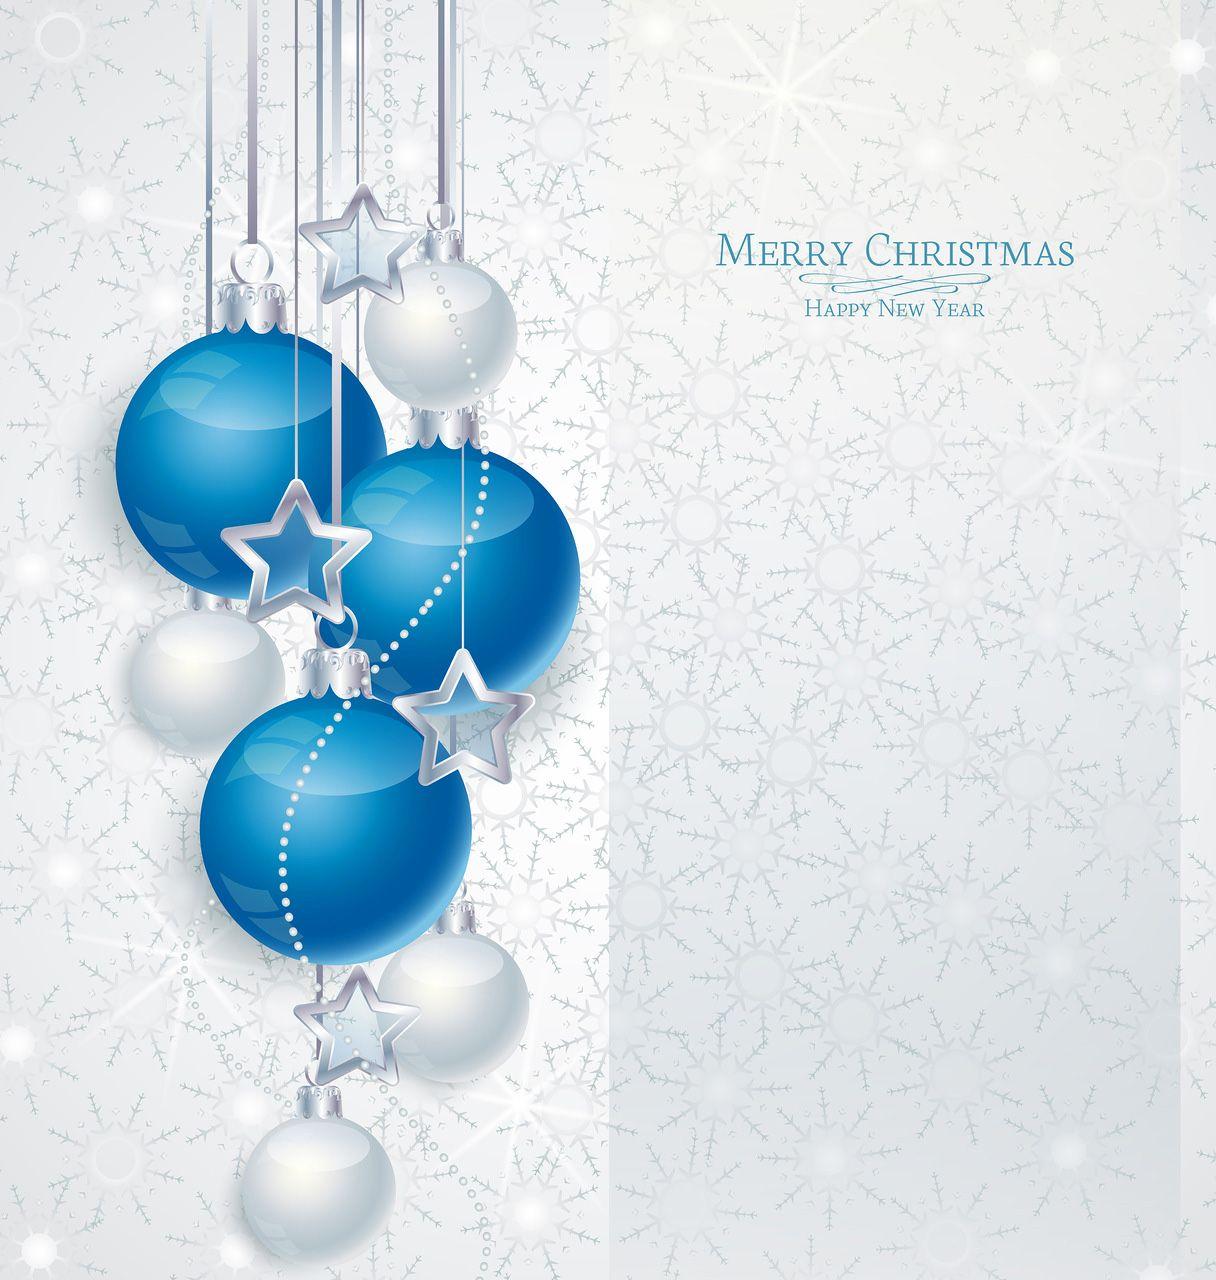 White Christmas Background With Blue Ornaments Quality Image And Transparent PNG Free Clipart